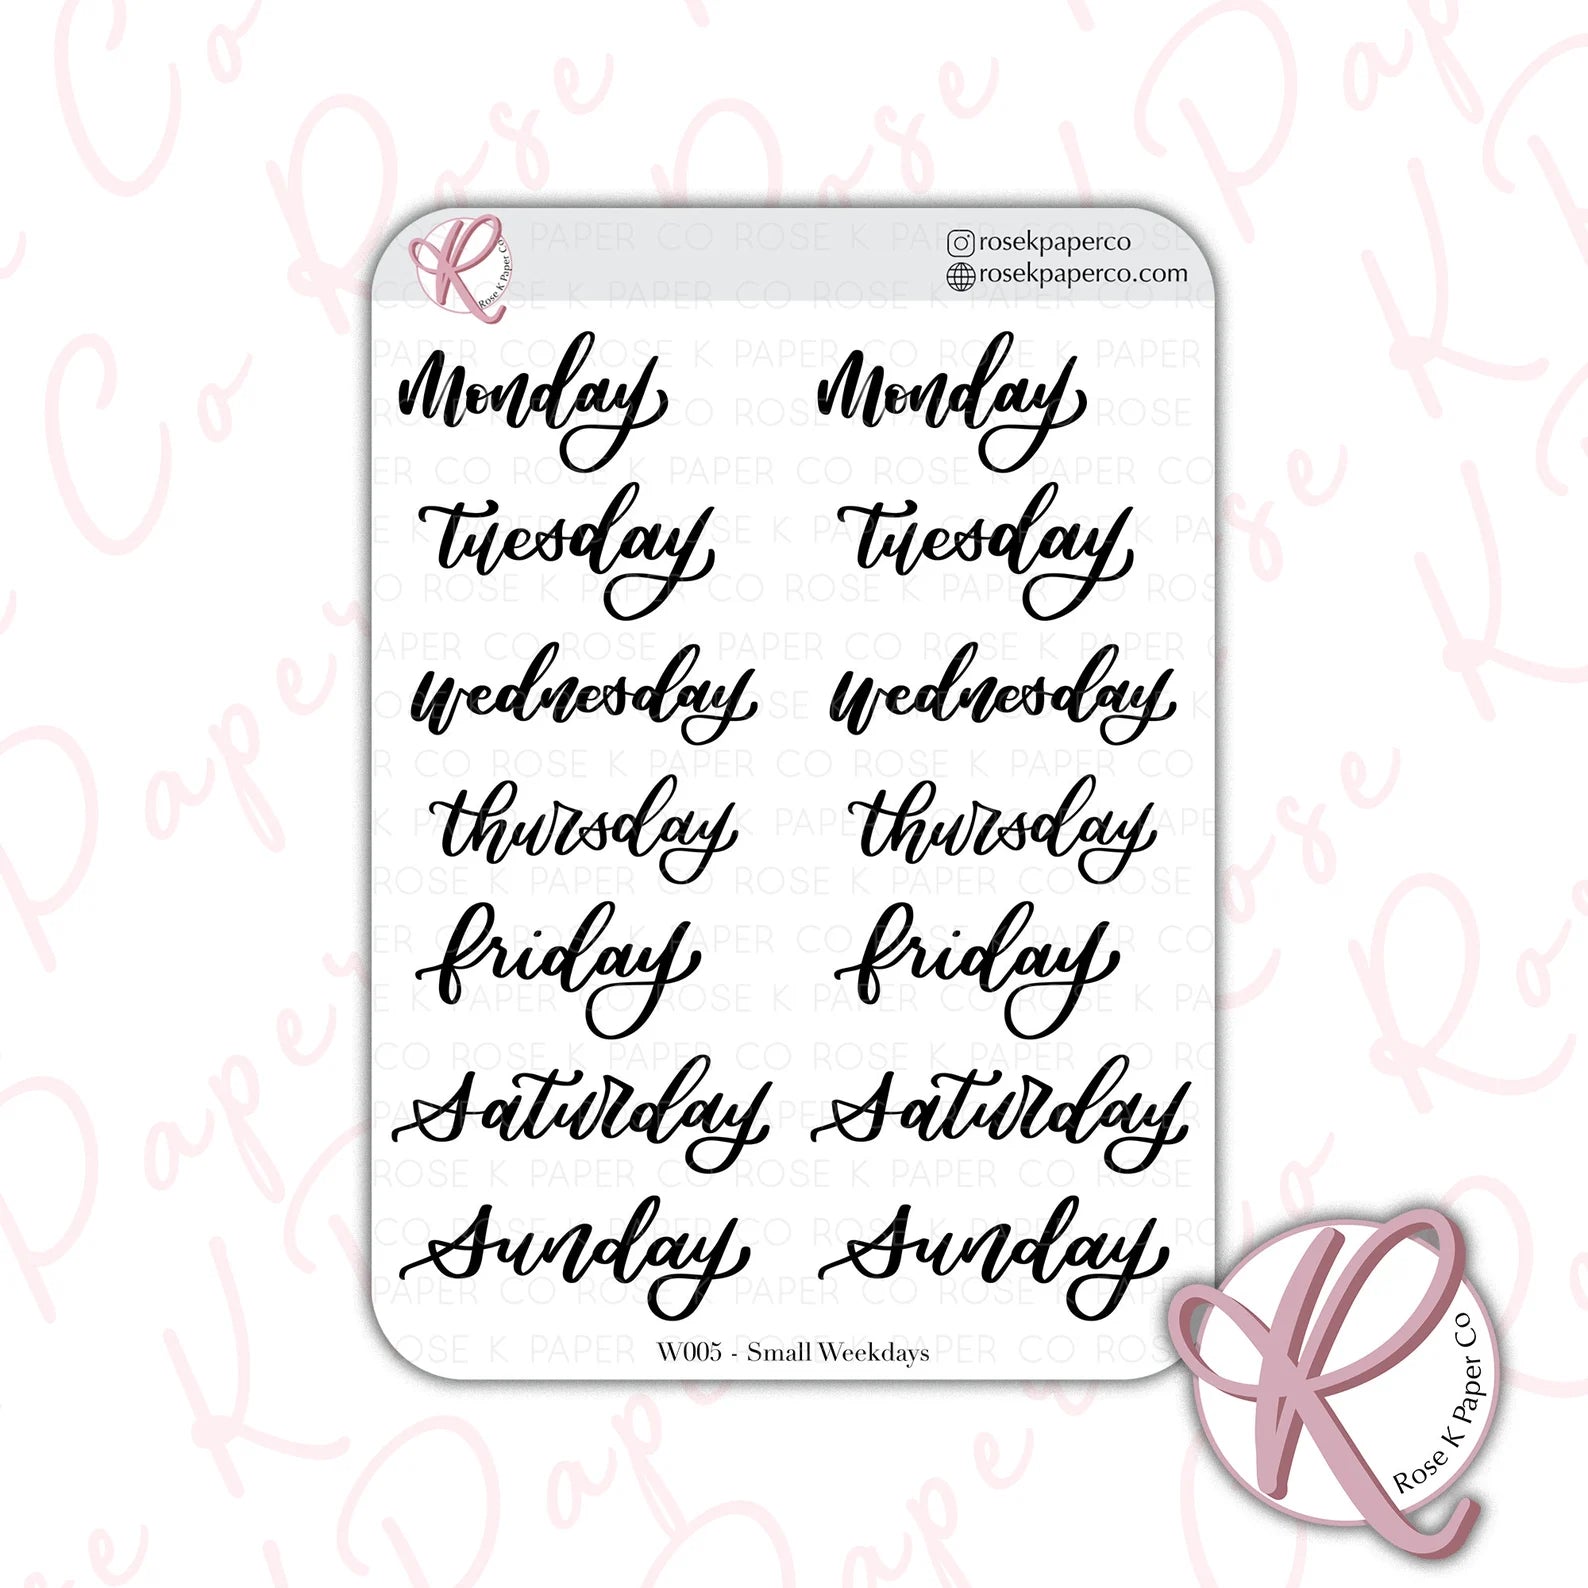 Rose K Paper Co Planner Stickers | Hand-lettered Days Of The Week